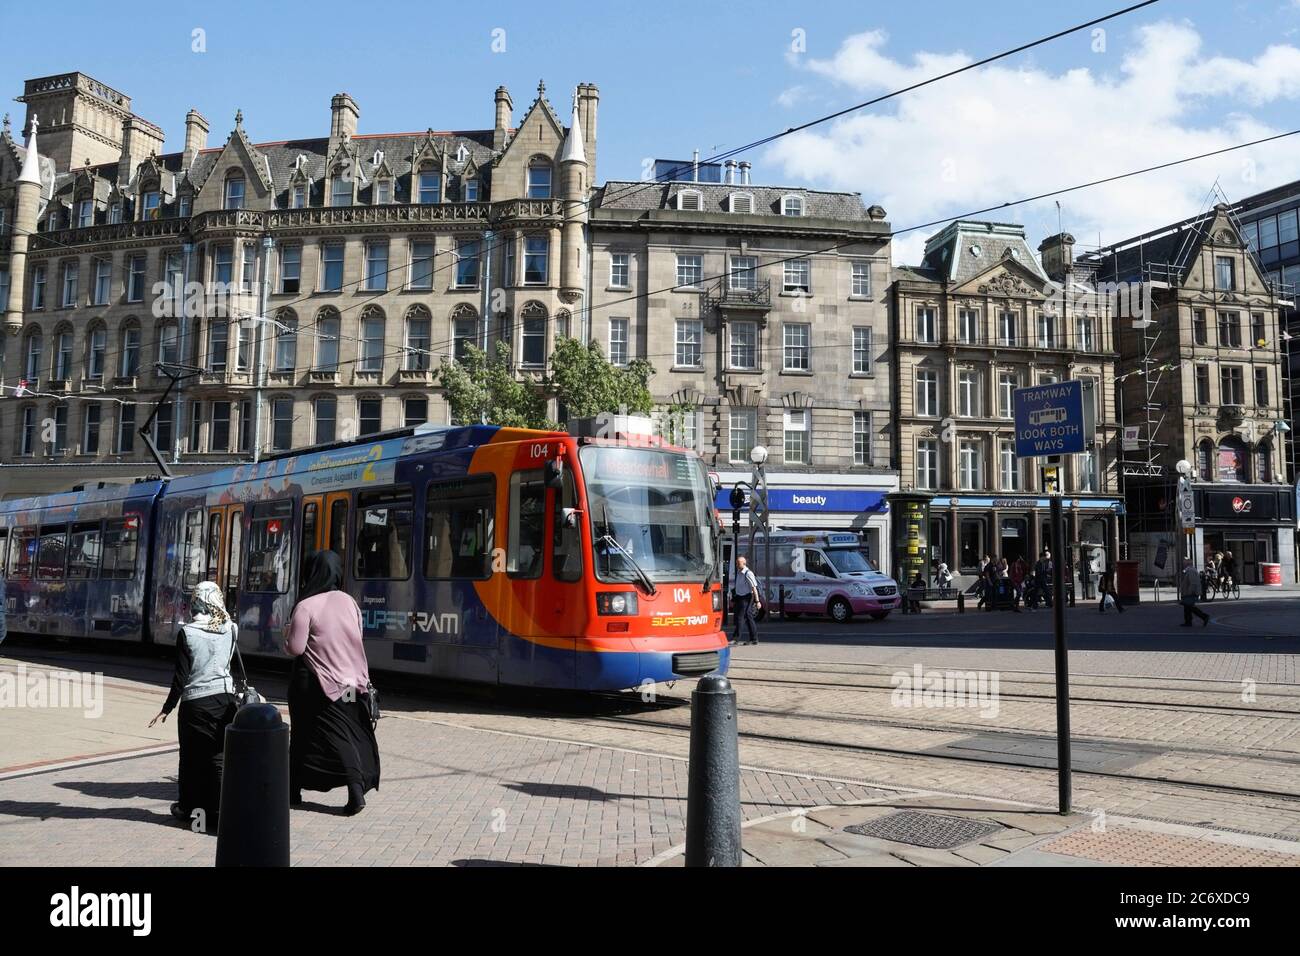 Supertram approaches the cathedral stop in Sheffield city centre England UK Metro Urban transport, light rail network Stock Photo